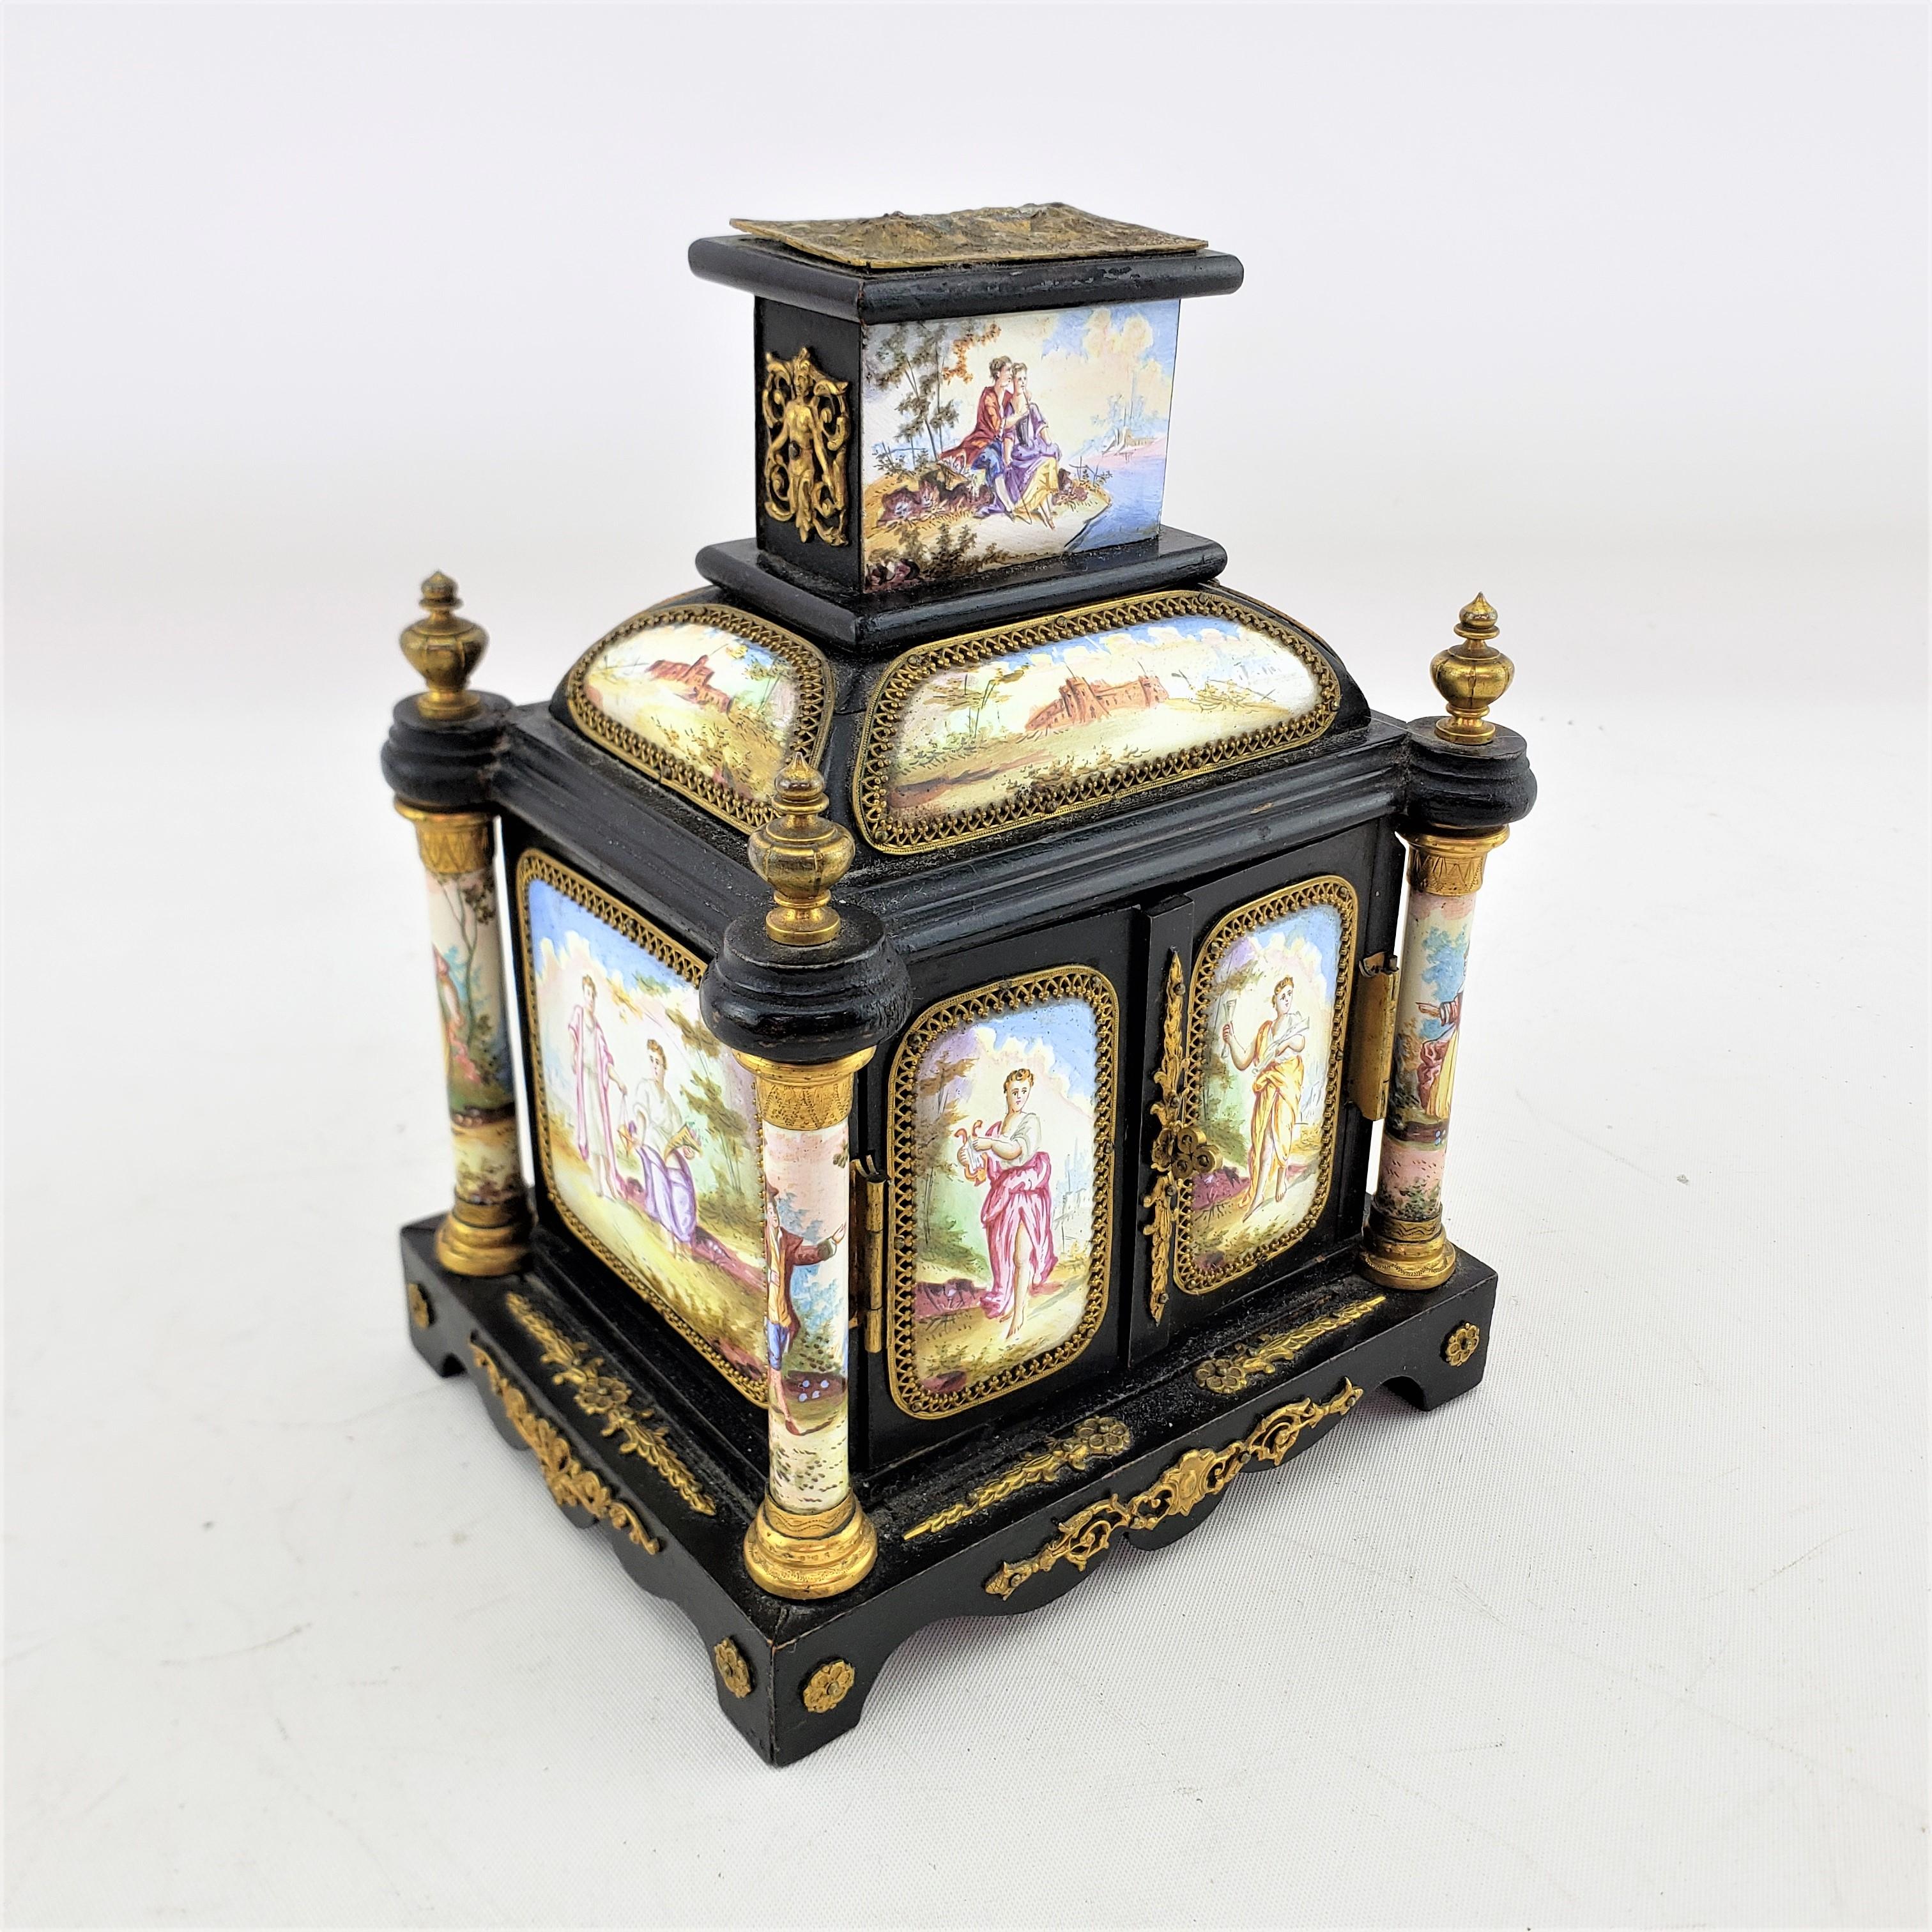 This antique miniature cabinet is unsigned, but presumed to have originated from Austria and date to approximately 1880 and done in a Romantic style. The box is composed of a softwood with a black painted finish with applied hand painted enamel